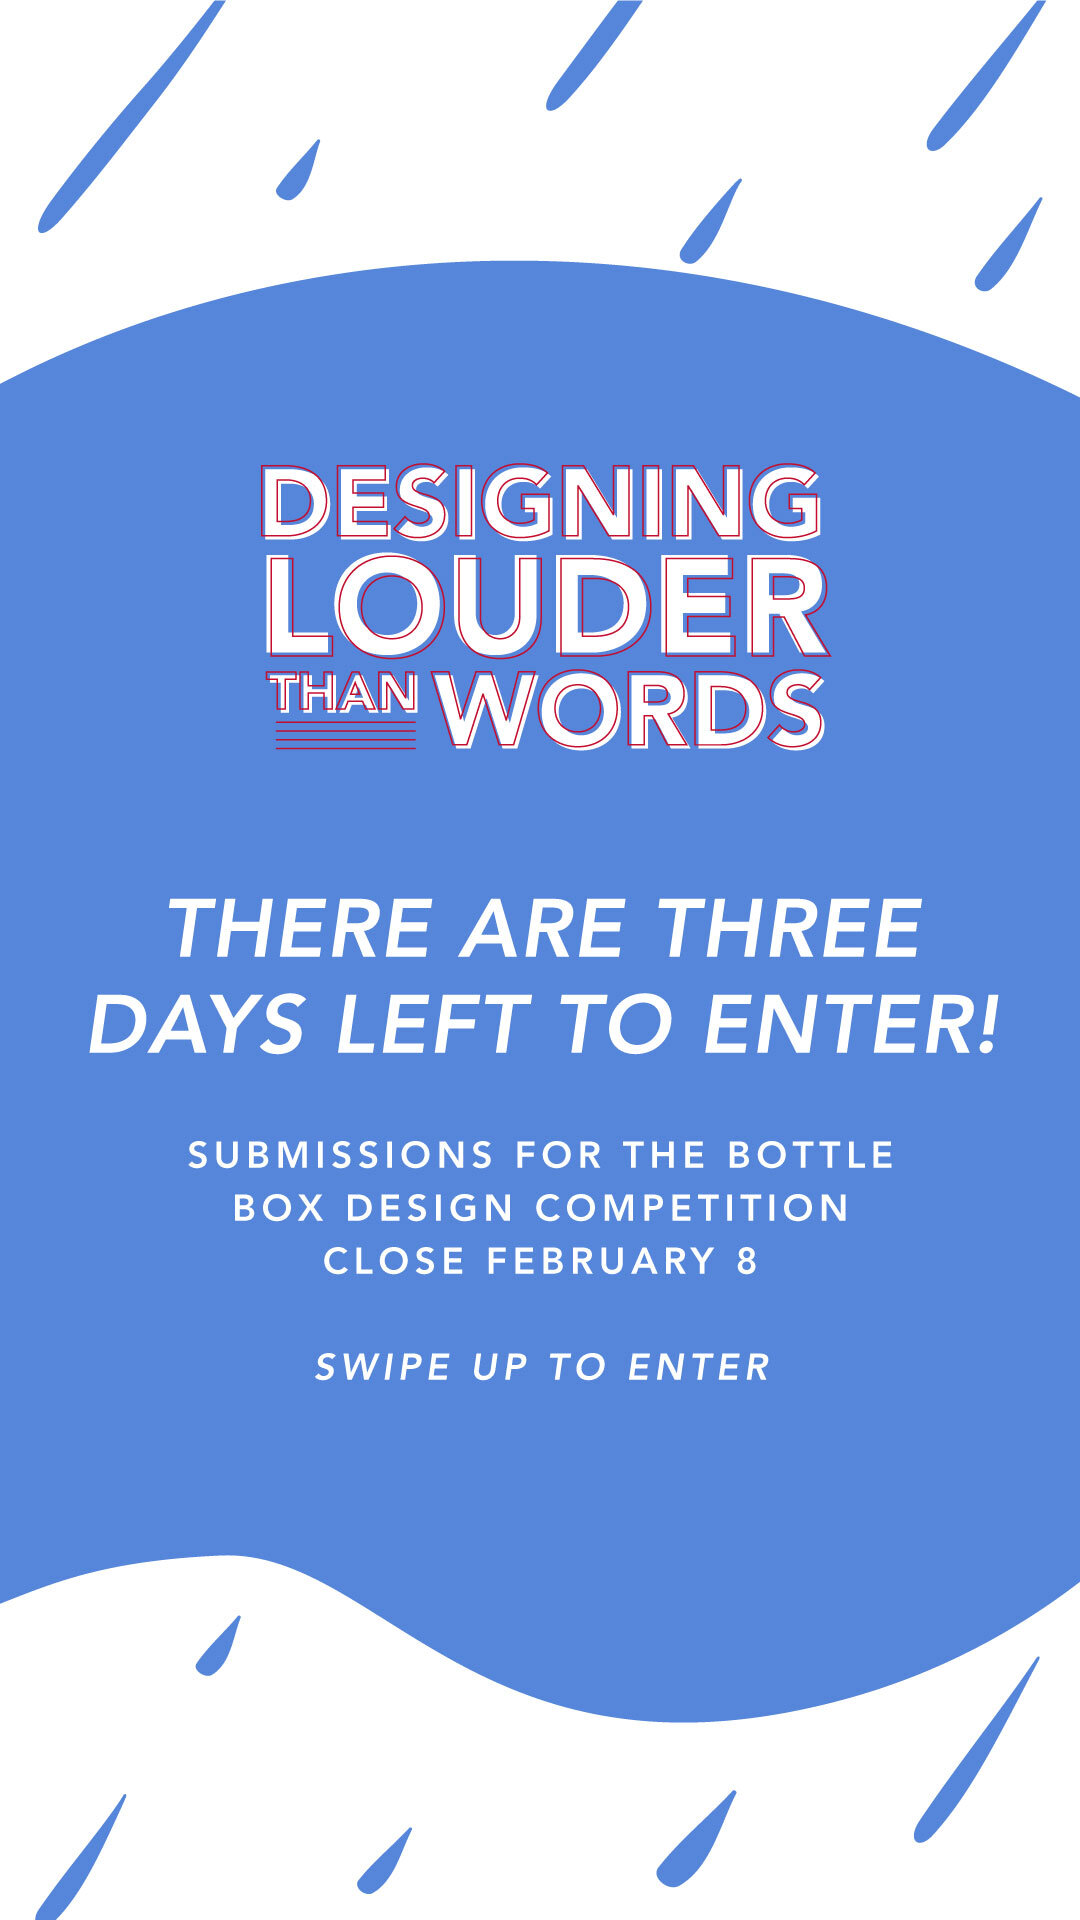  Designing Louder than Words Call for Entries graphic on a blue background with raindrop illustrations. 